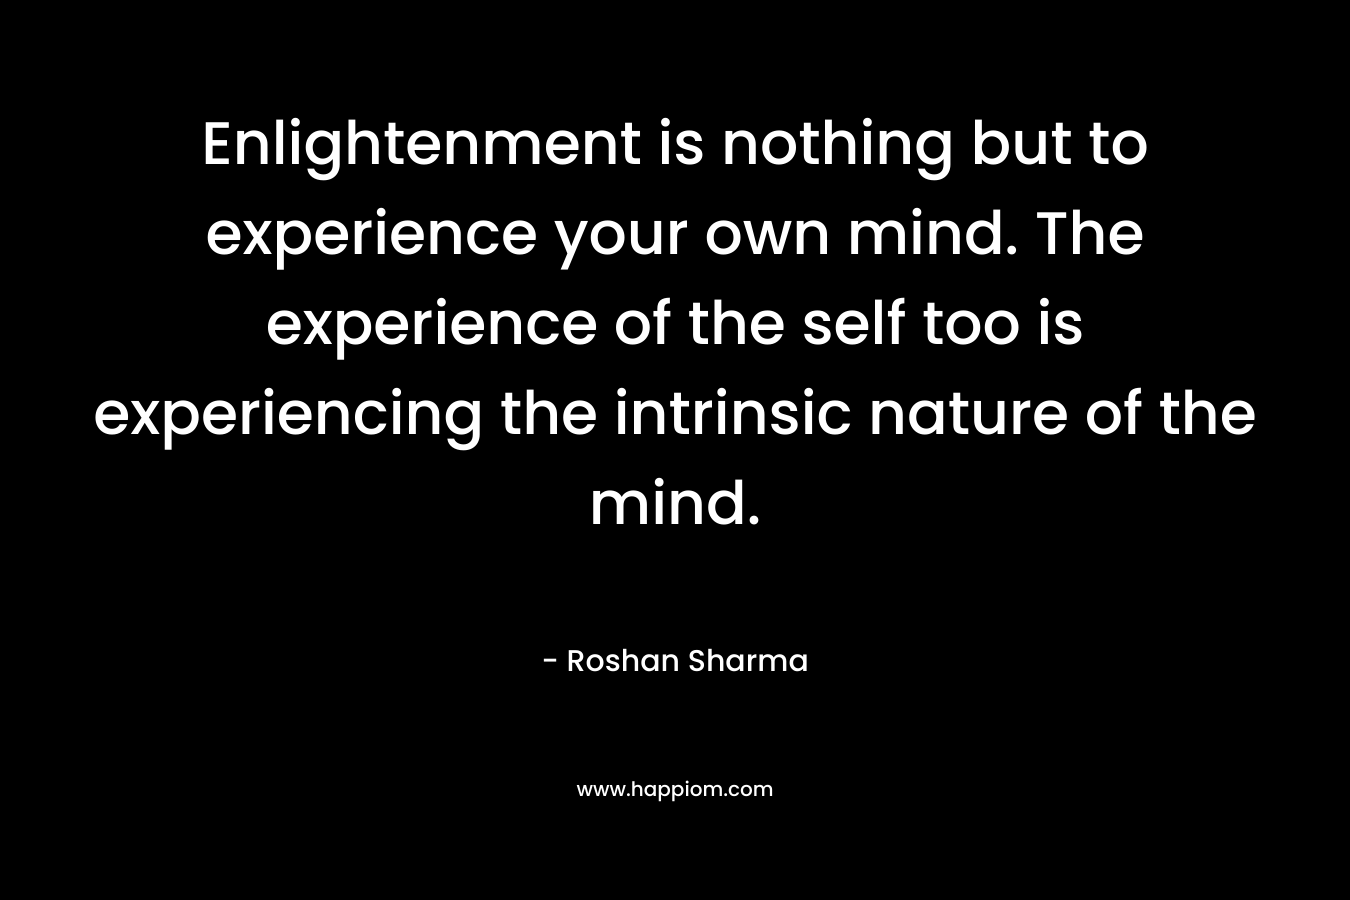 Enlightenment is nothing but to experience your own mind. The experience of the self too is experiencing the intrinsic nature of the mind.